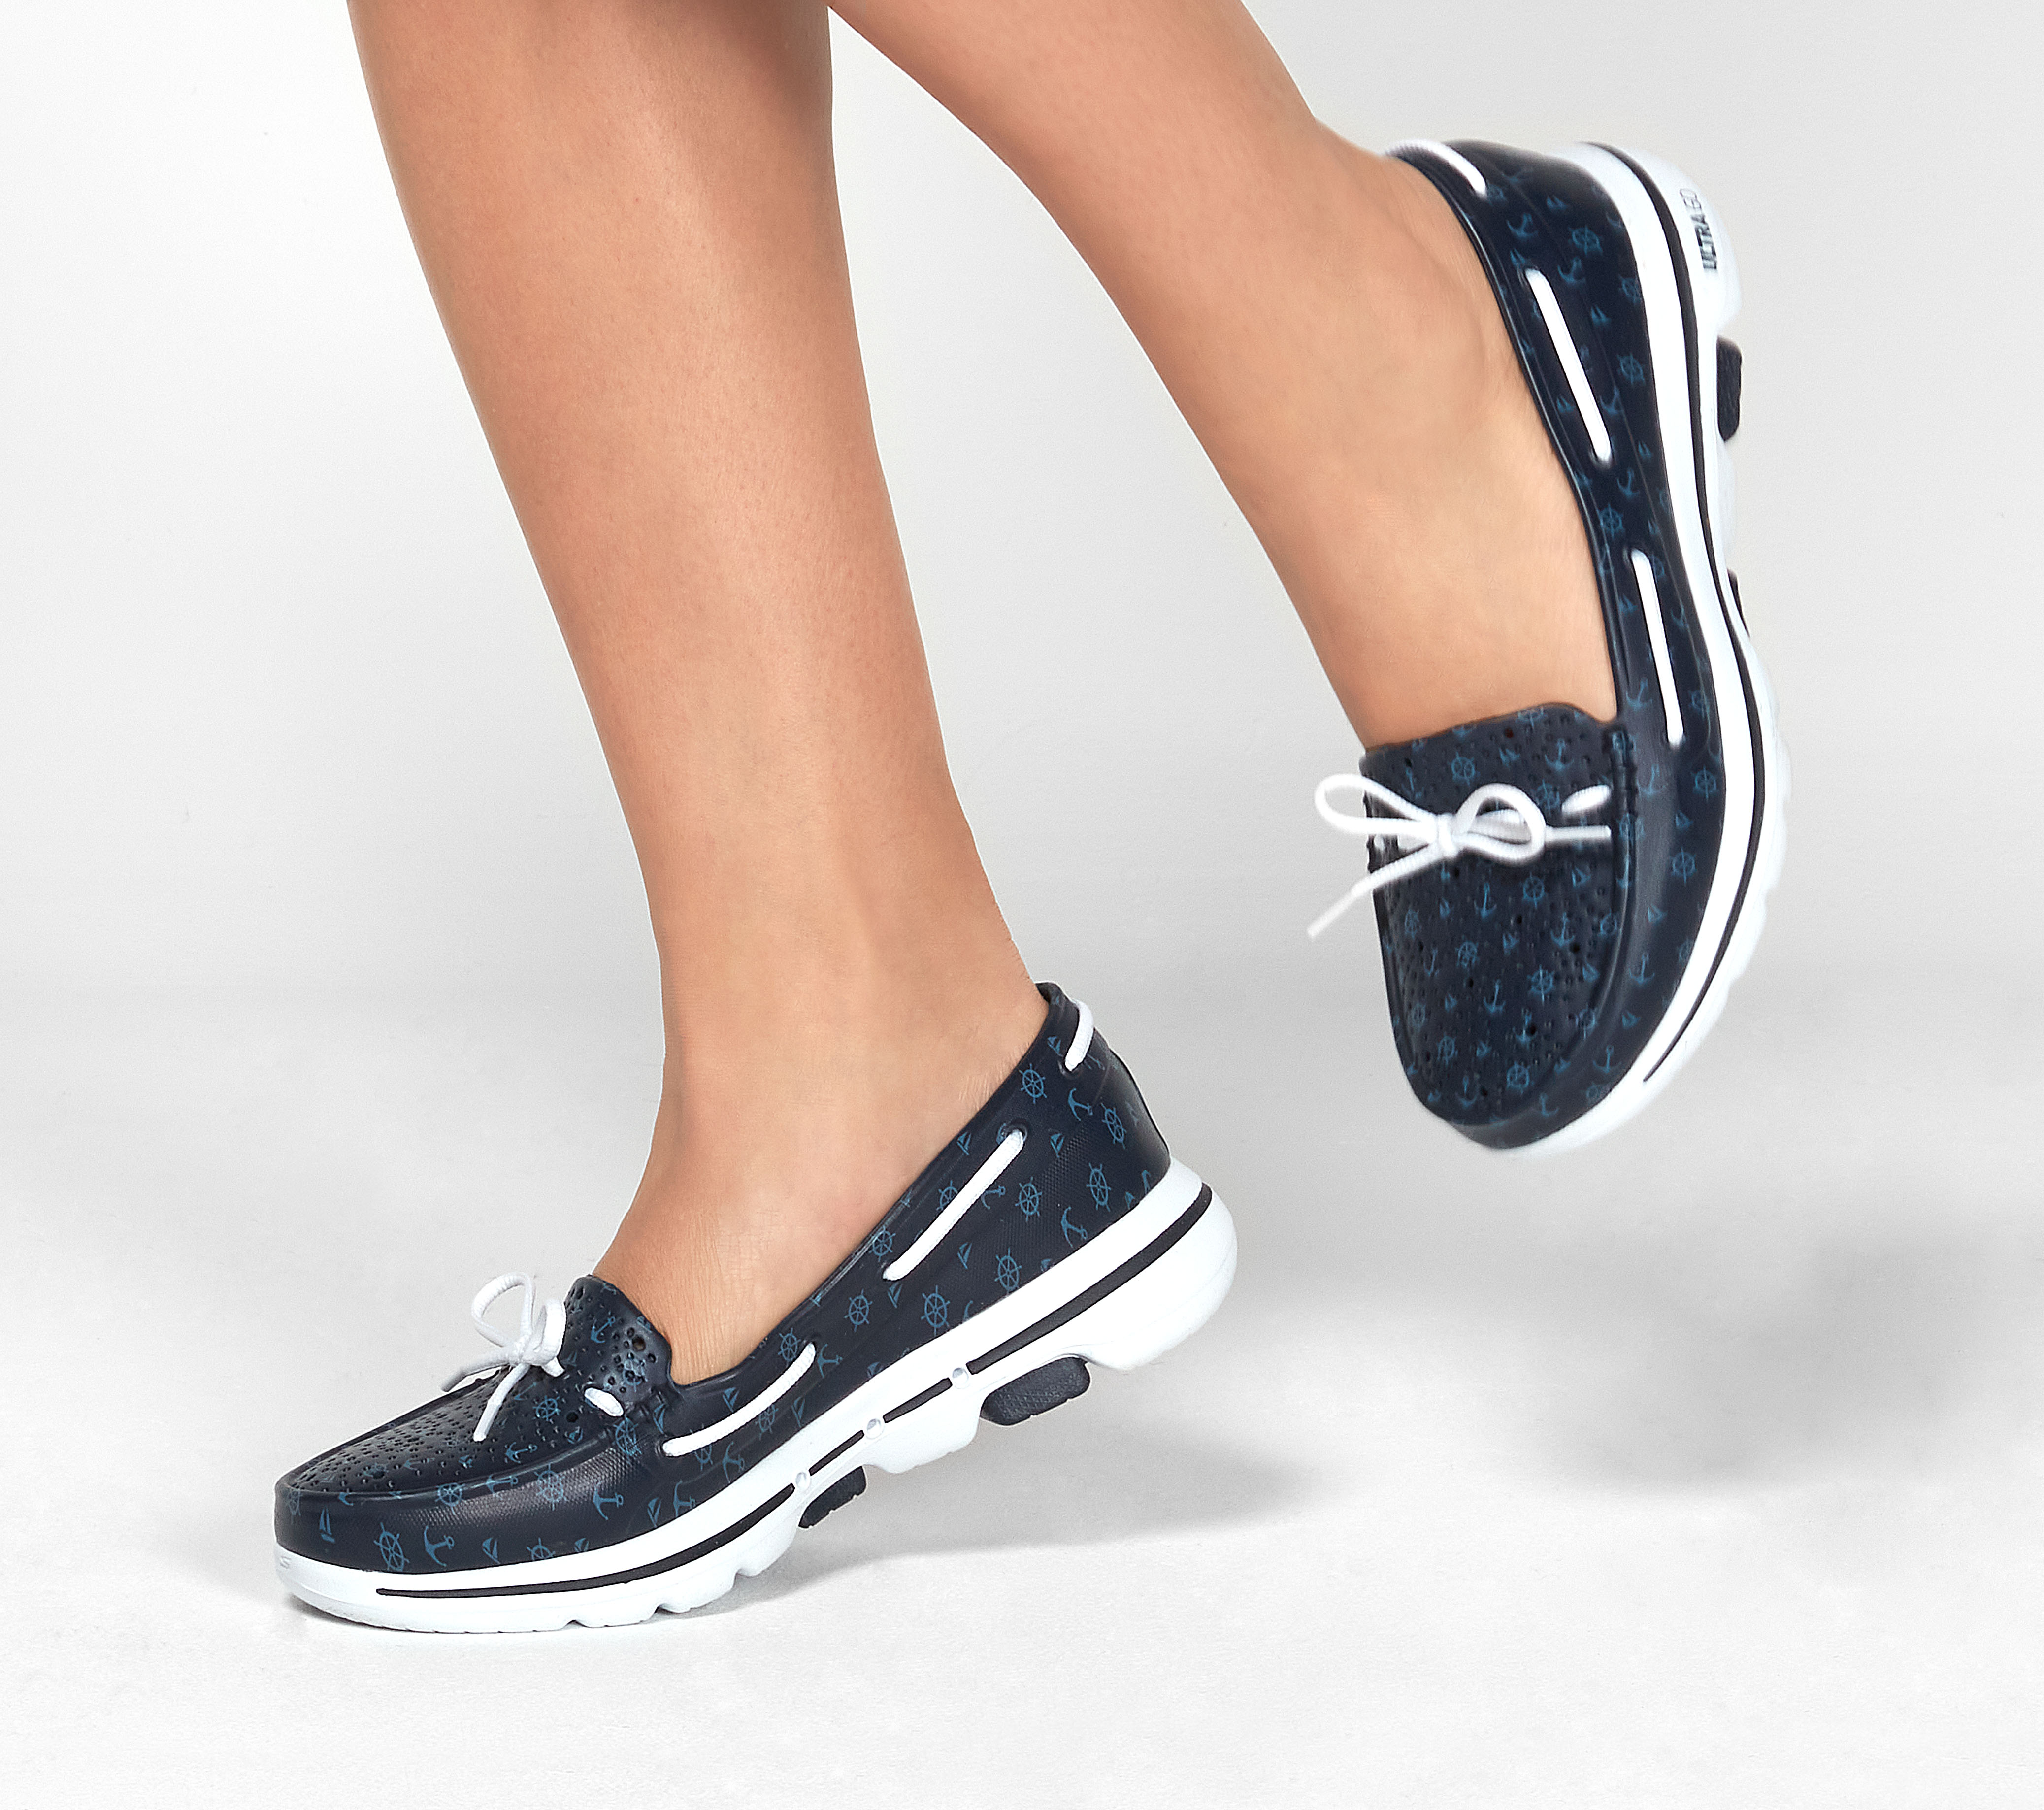 skechers on the go sail navy